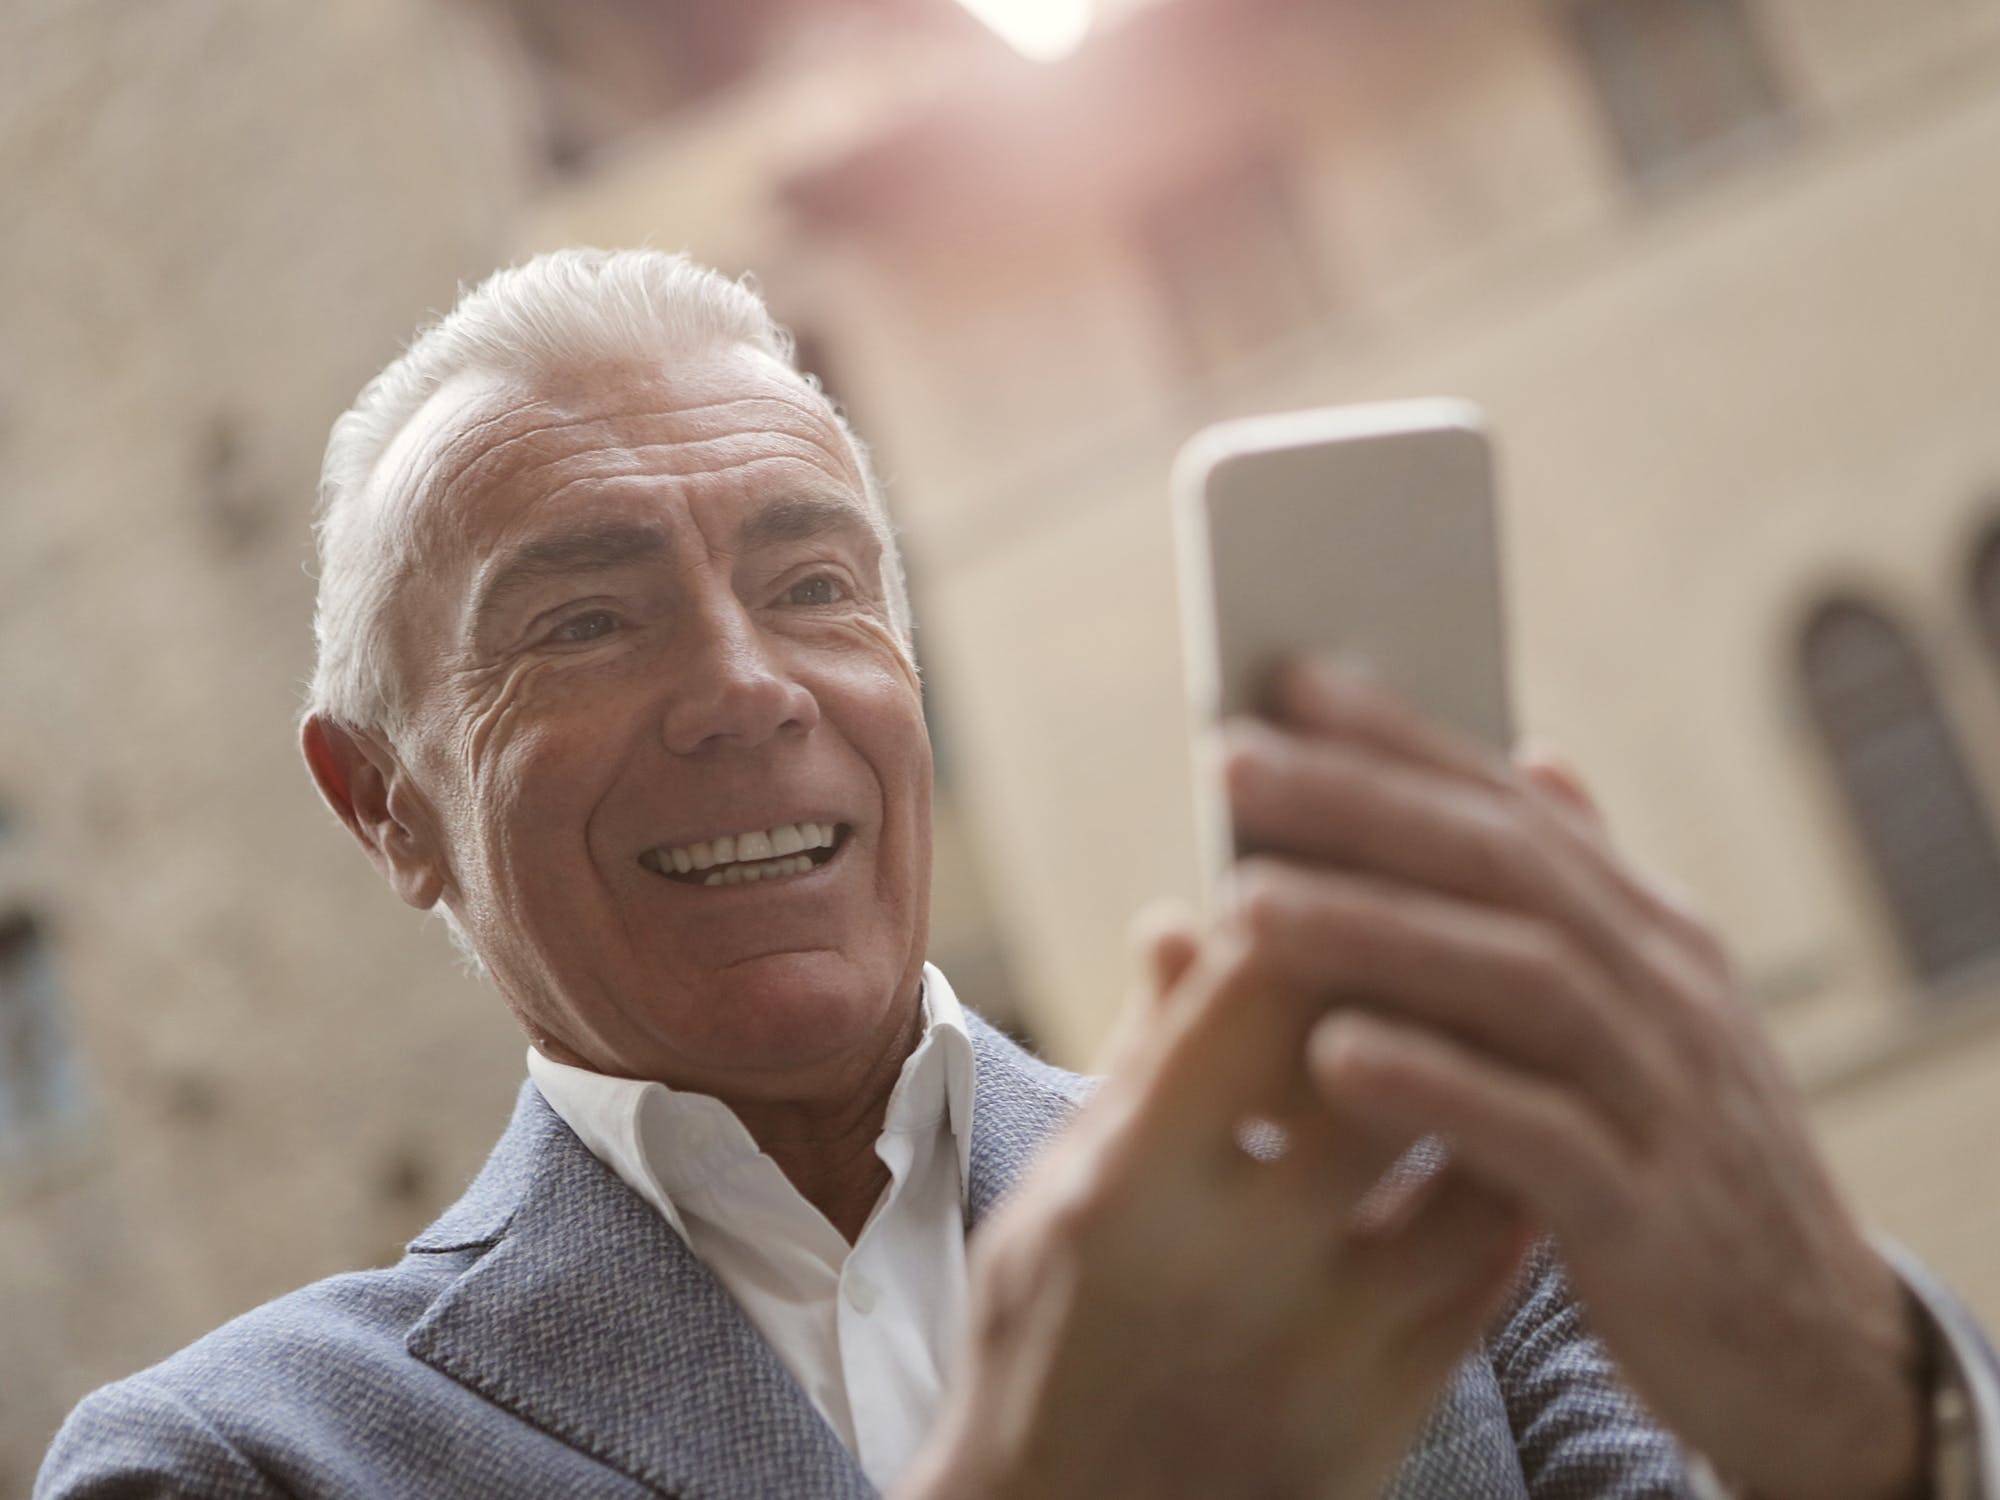 An elderly man on a video call in a public space.